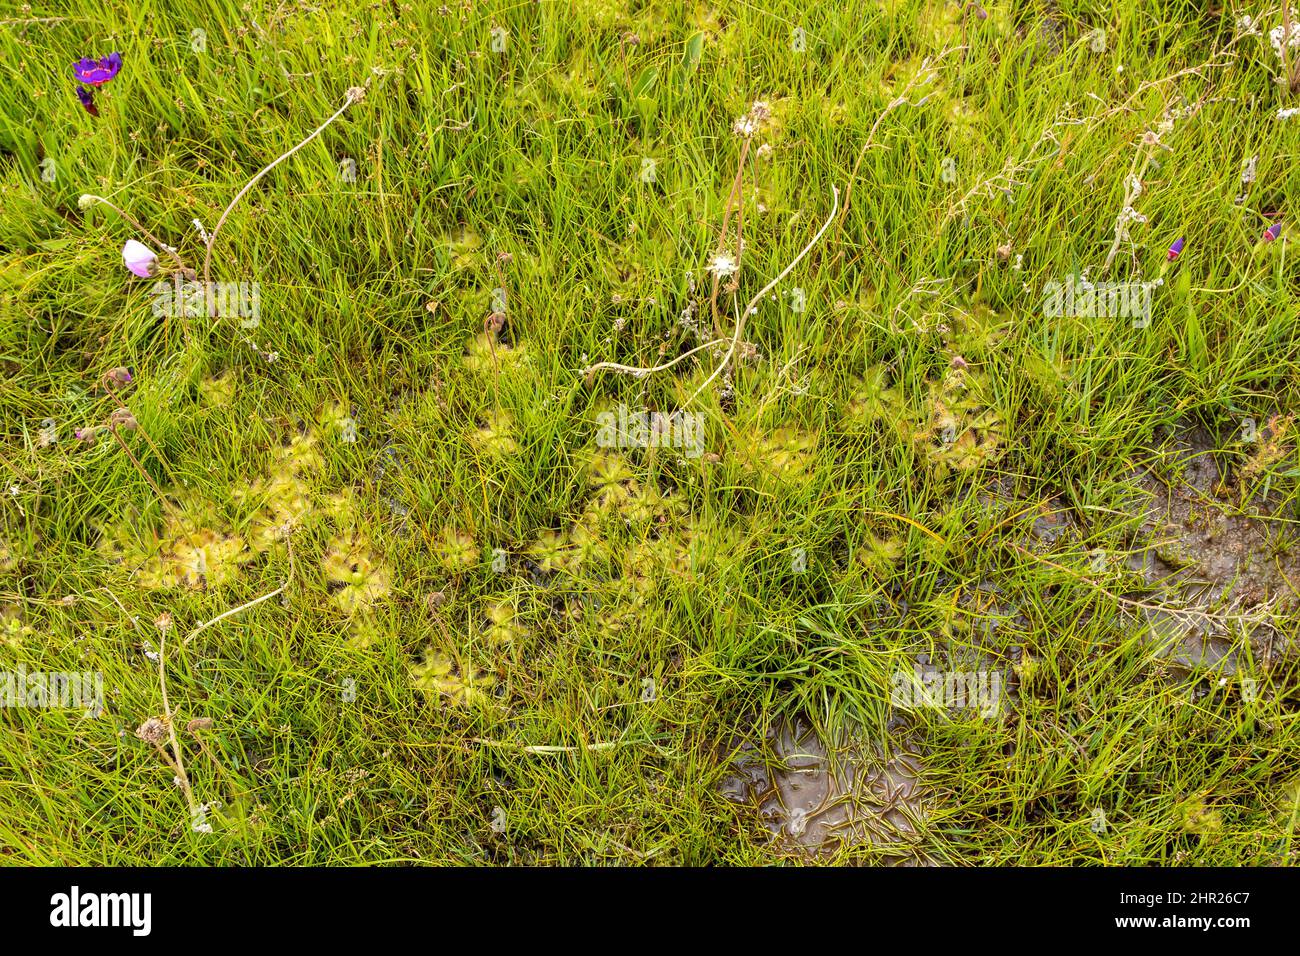 Carnivorous Plants: Rosettes of the Sundew Drosera pauciflora seen in natural habitat near Darling in the Western Cape of South Africa Stock Photo